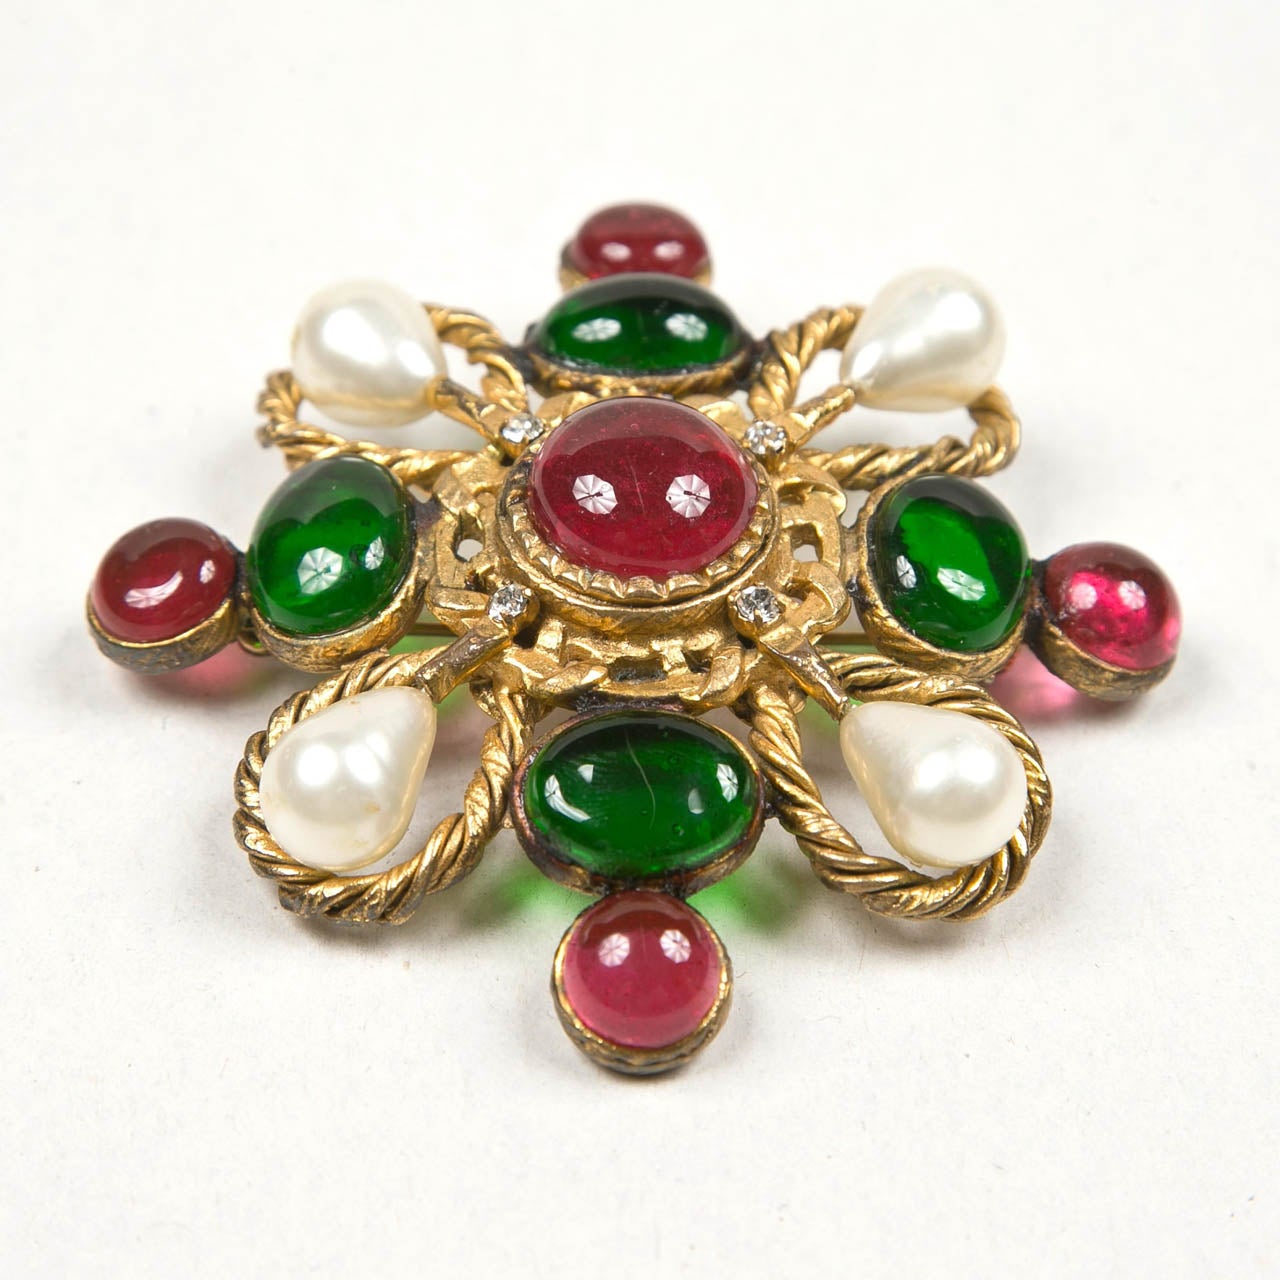 Vintage Chanel Maltese Cross Brooch with faux Pearls and Green and Dark Pink poured glass